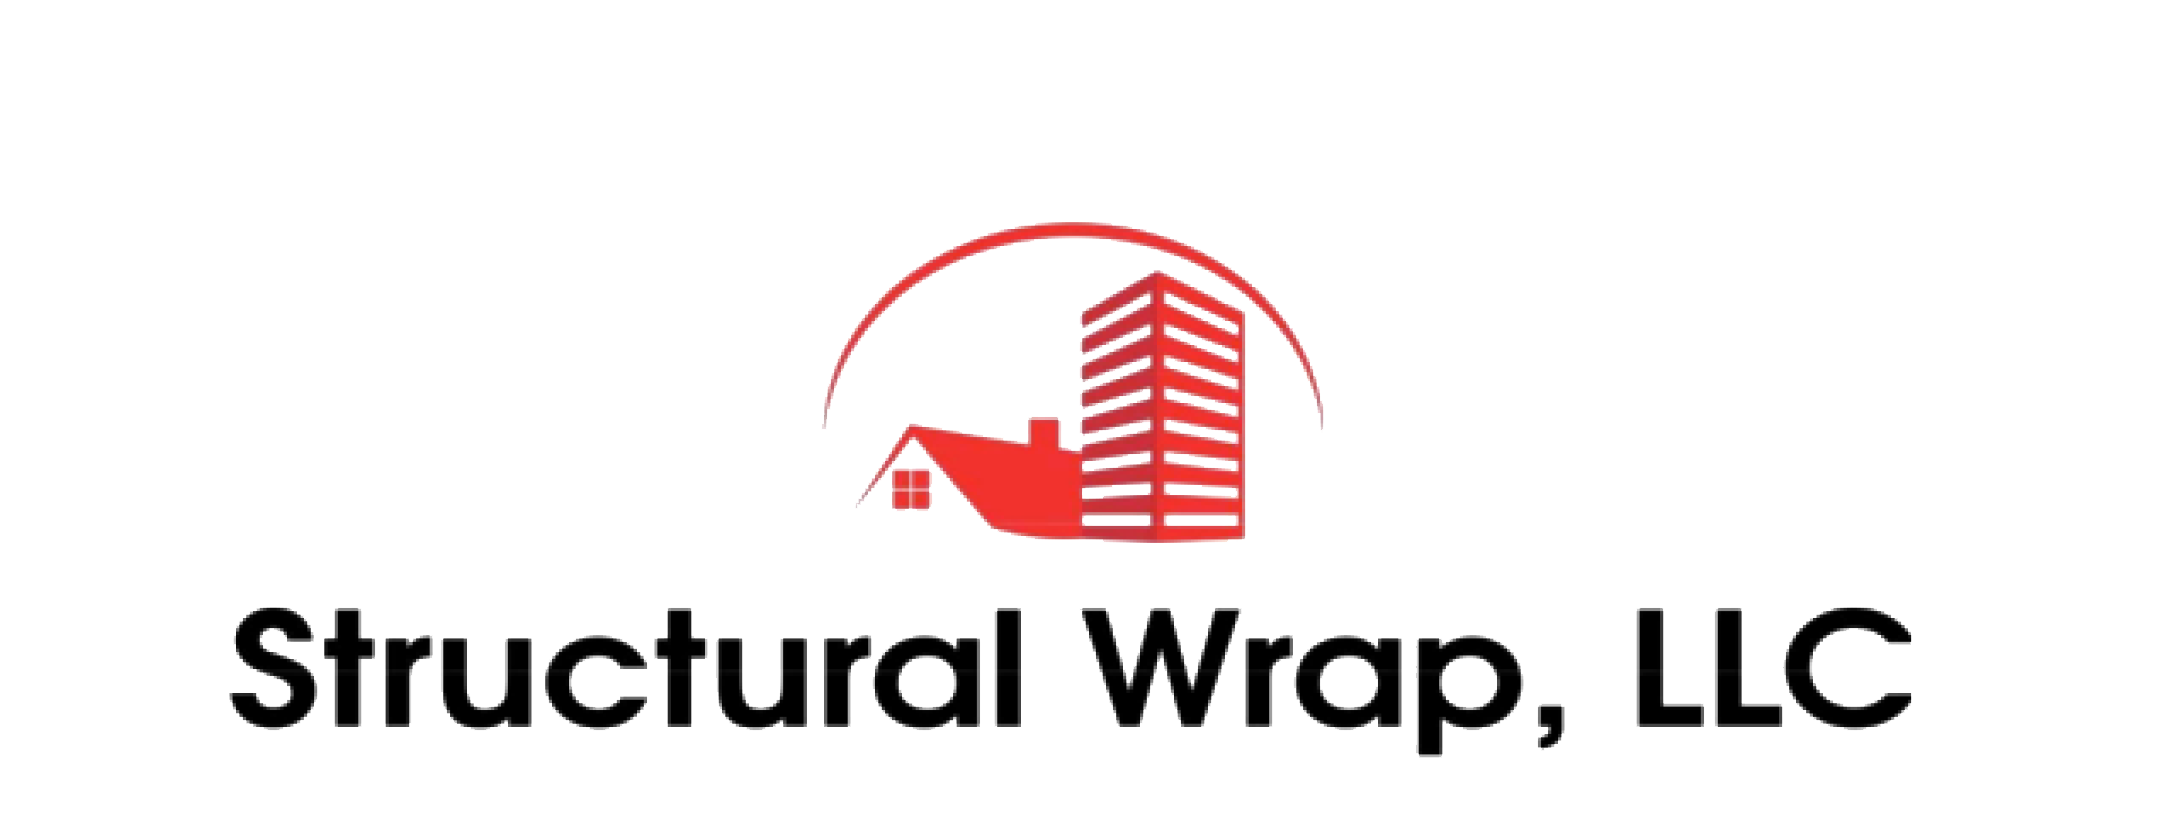 Structural Wrap